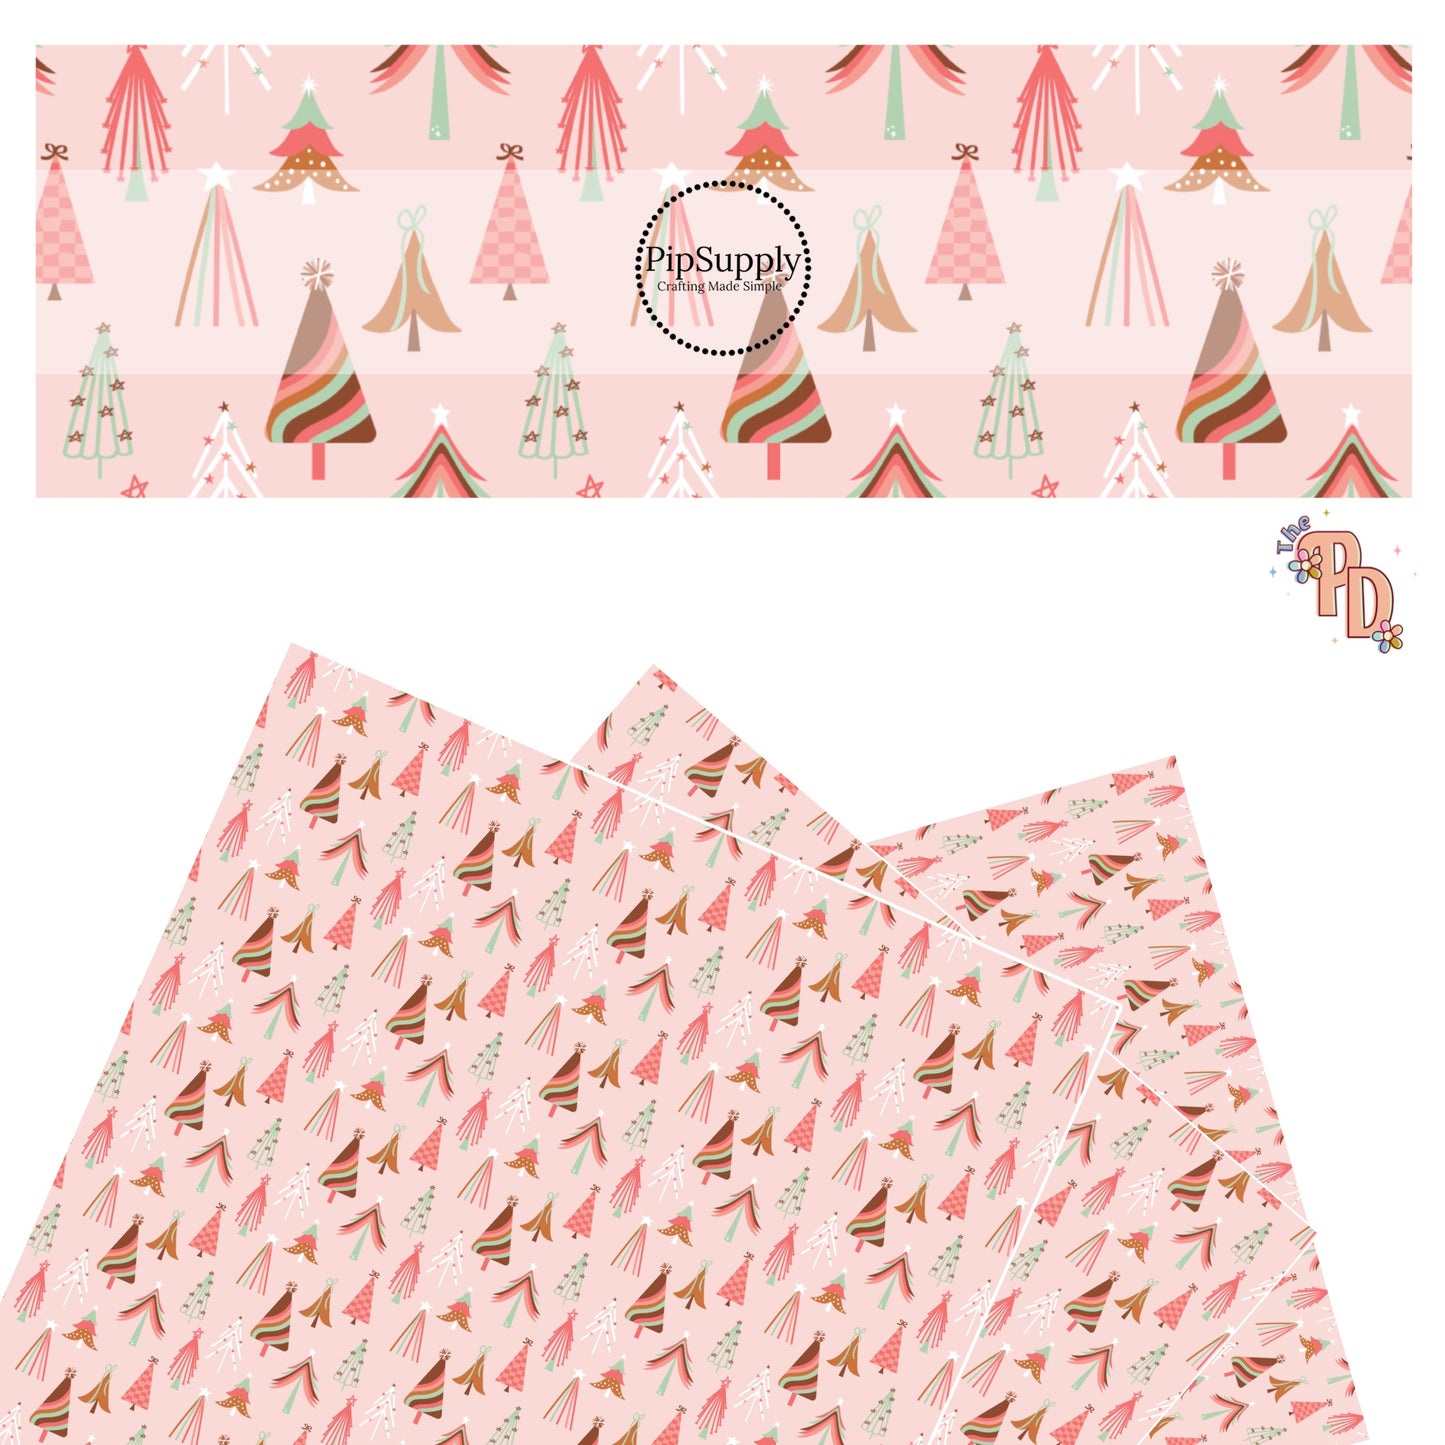 Patterned christmas trees pink and green on pink faux leather sheets